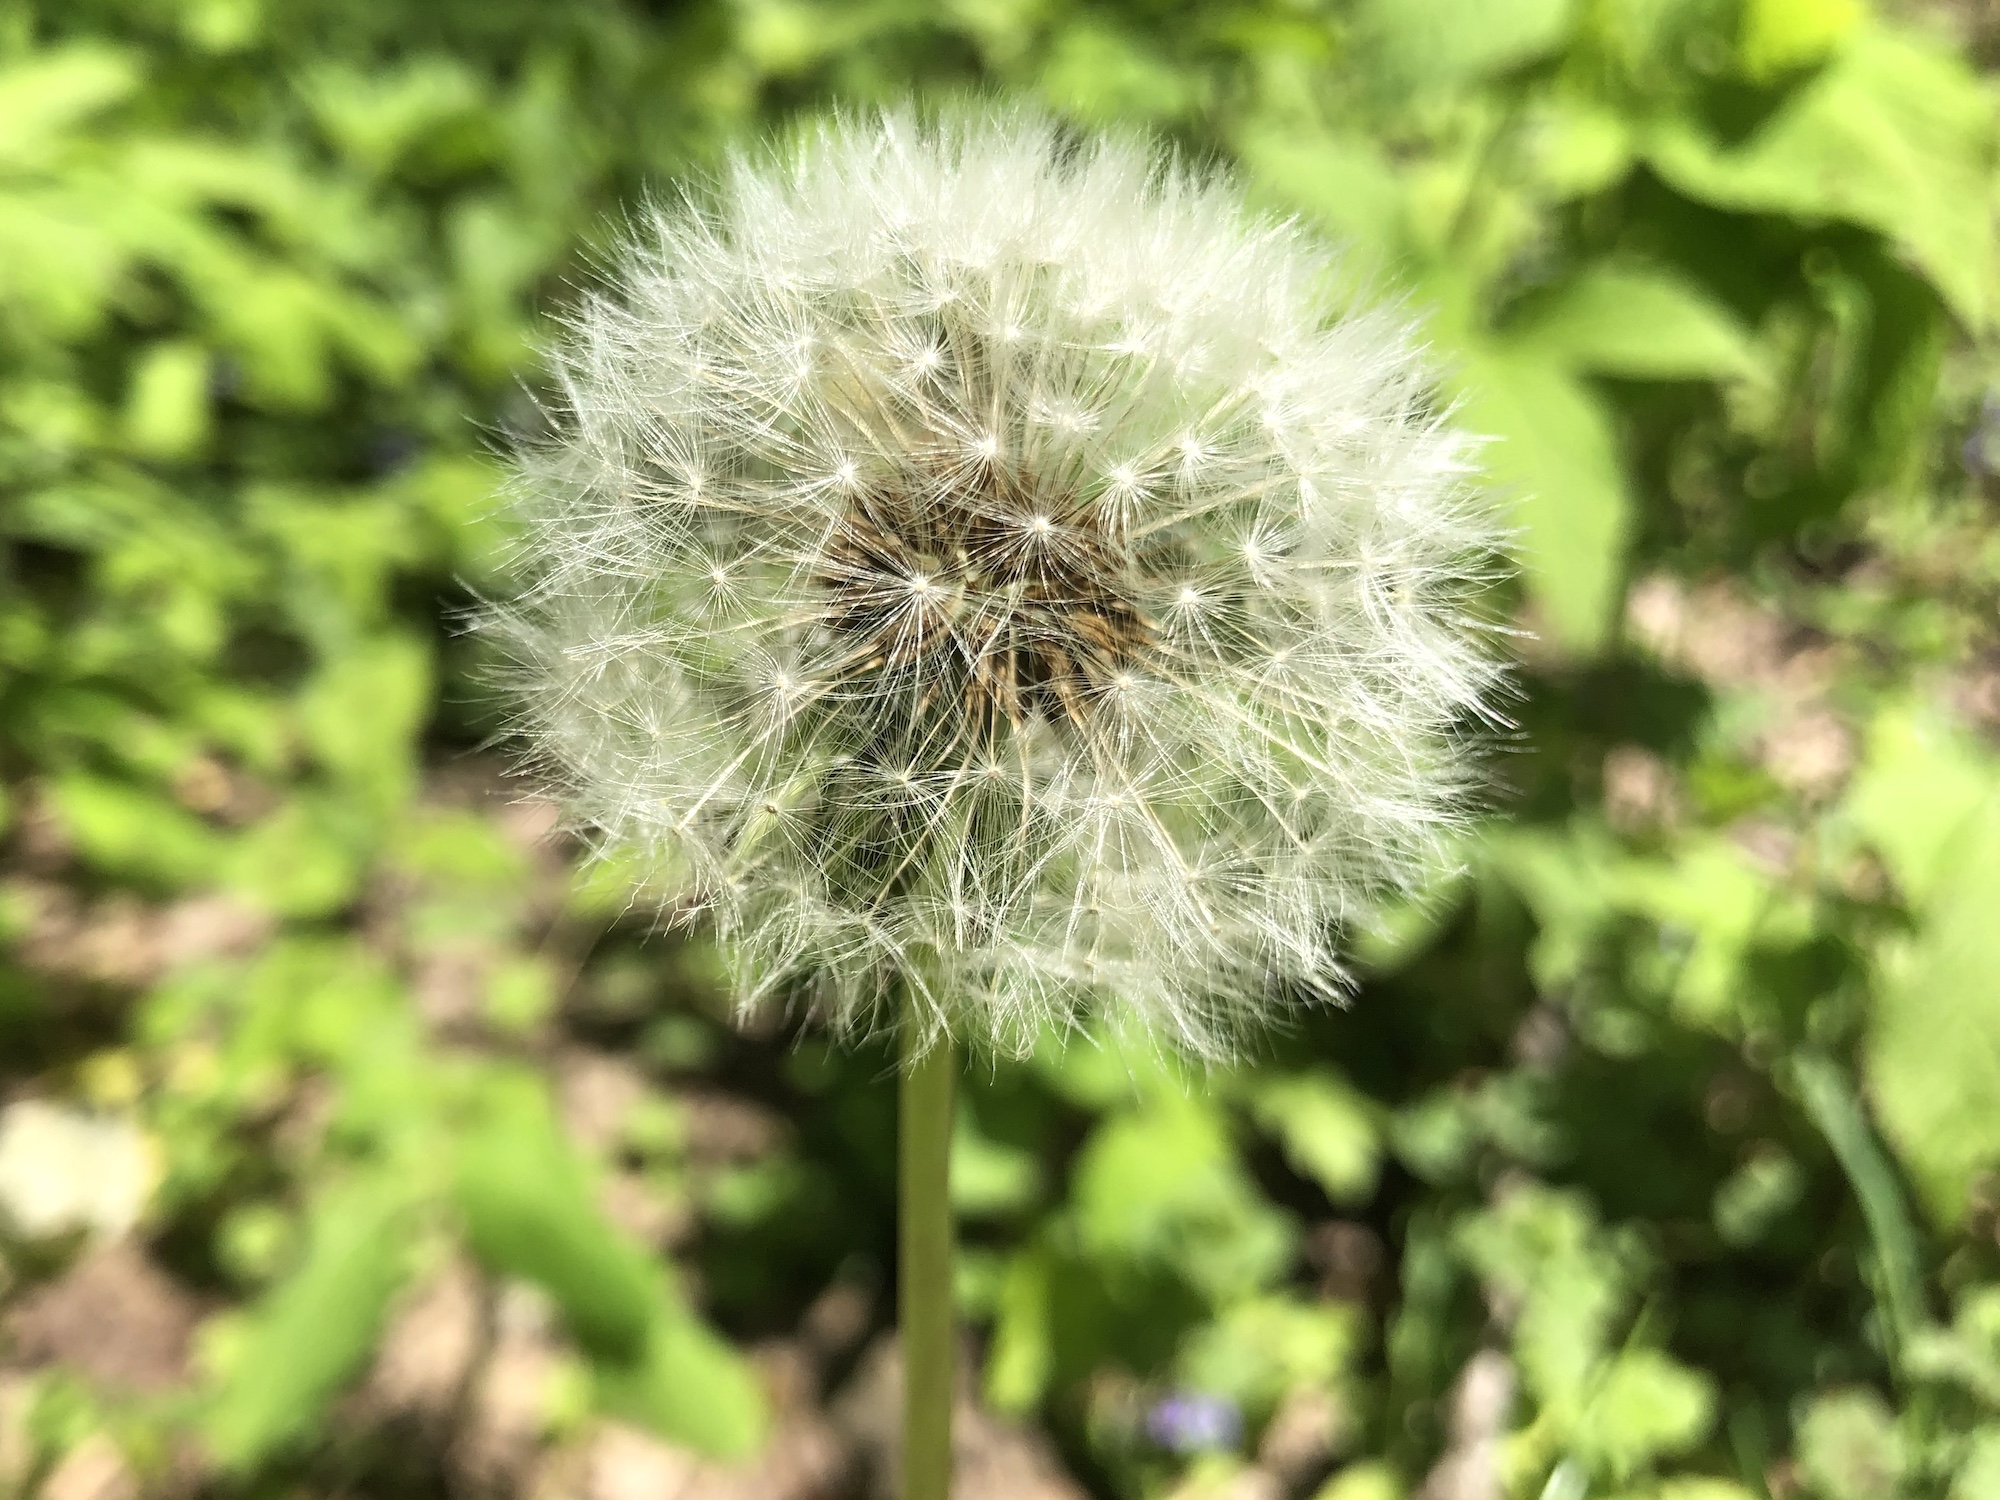 Dandelion puffball in Nakoma Park in Madison, Wisconsin on May 26, 2020.